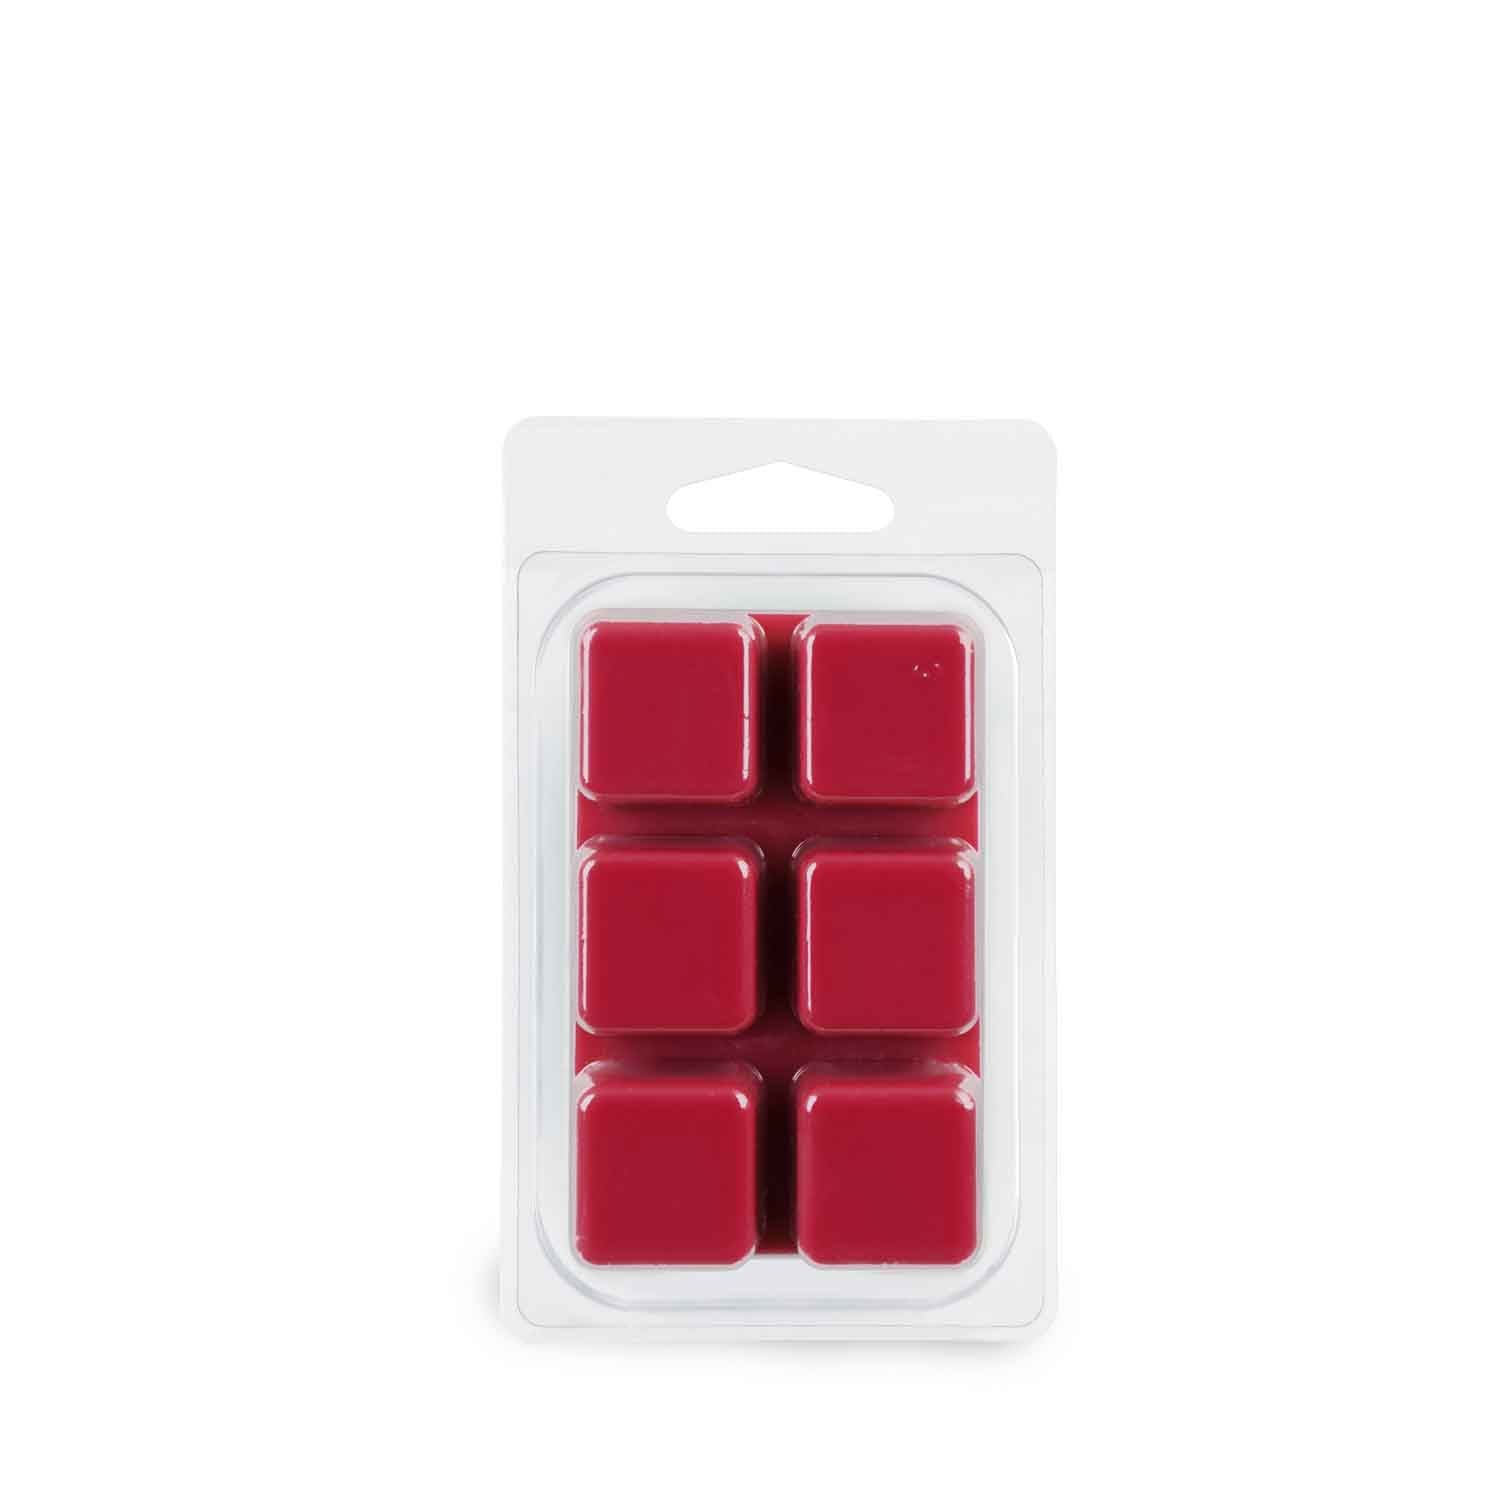 A pack of Forever Rose scented wax melts (2.5 oz) on a white background by Tuscany Candle®.